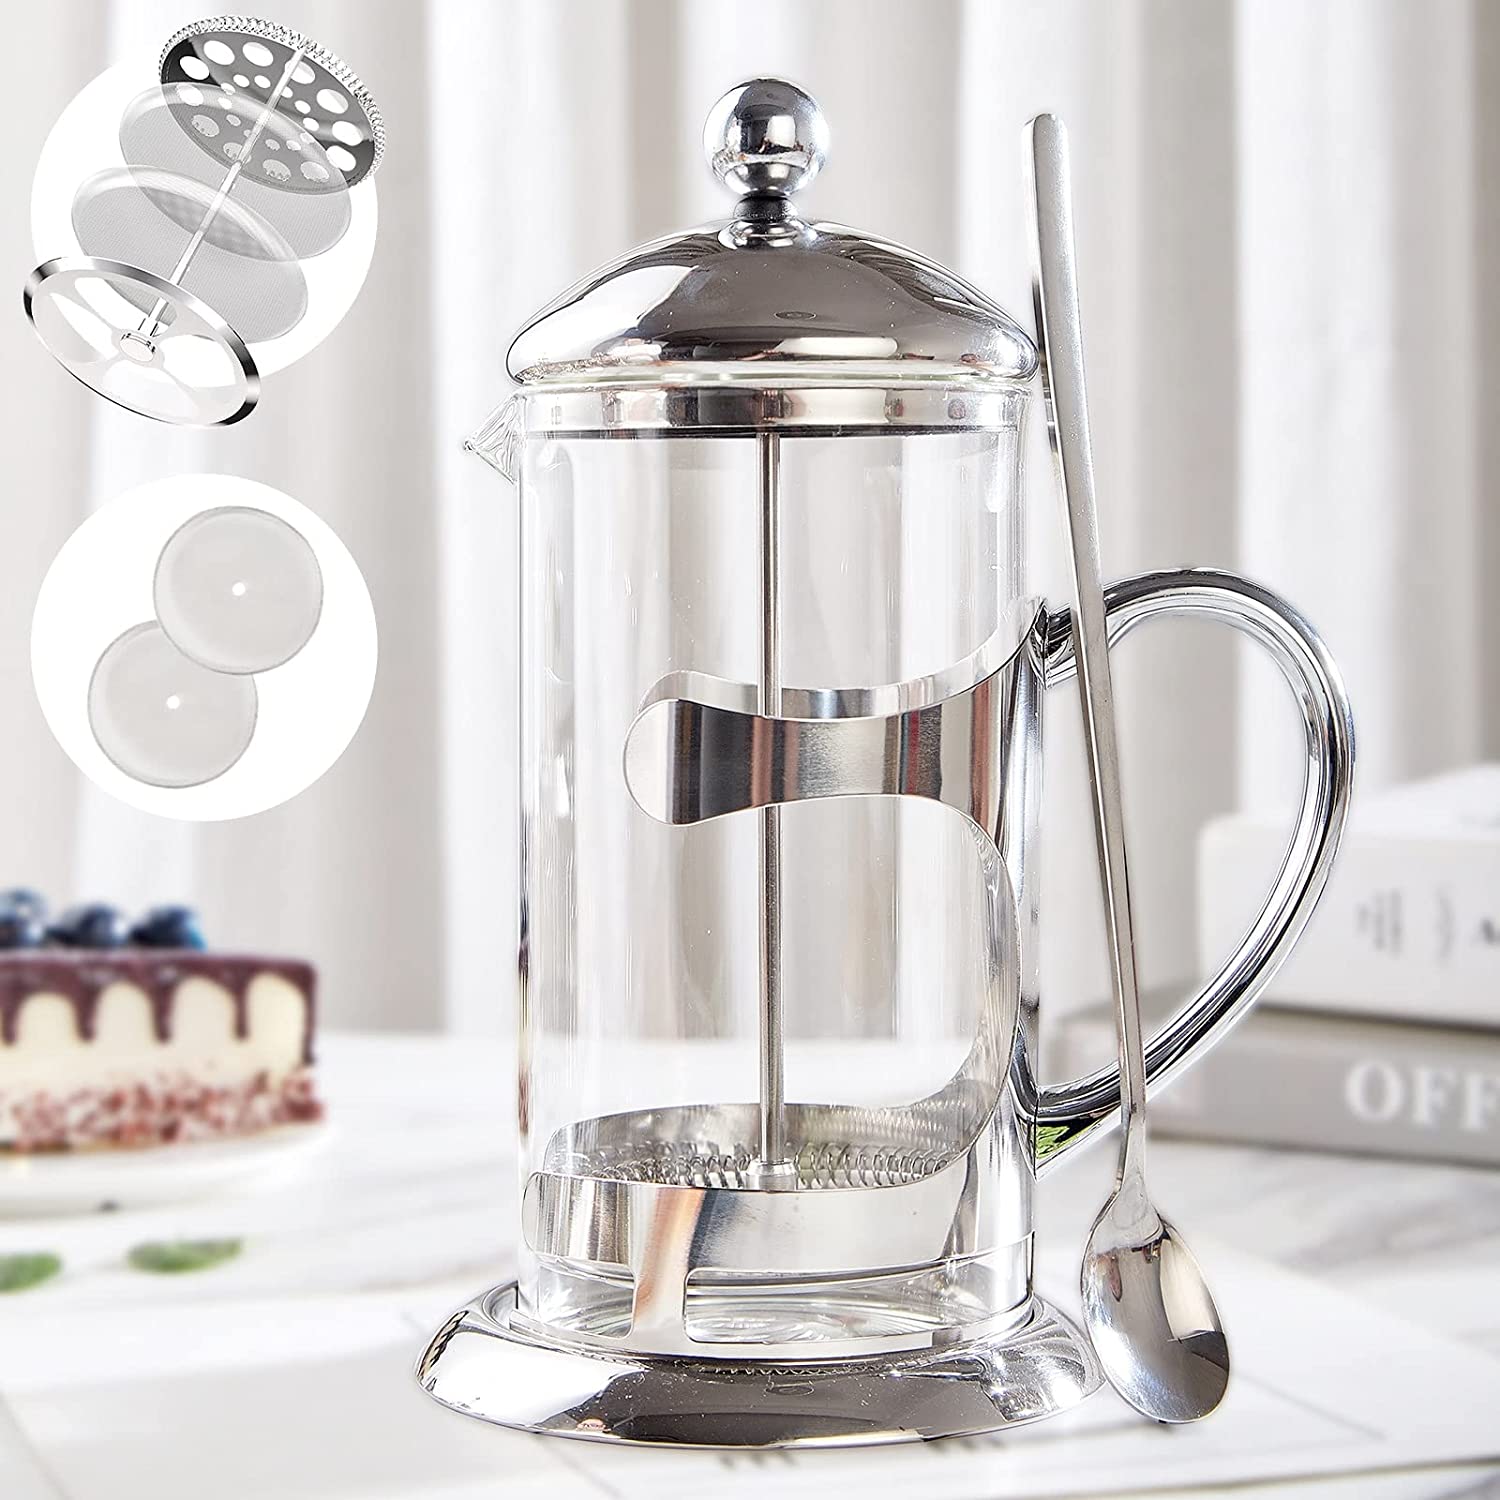 QUQIYSO French Press Coffee Maker 34 Oz Large Stainless Steel +